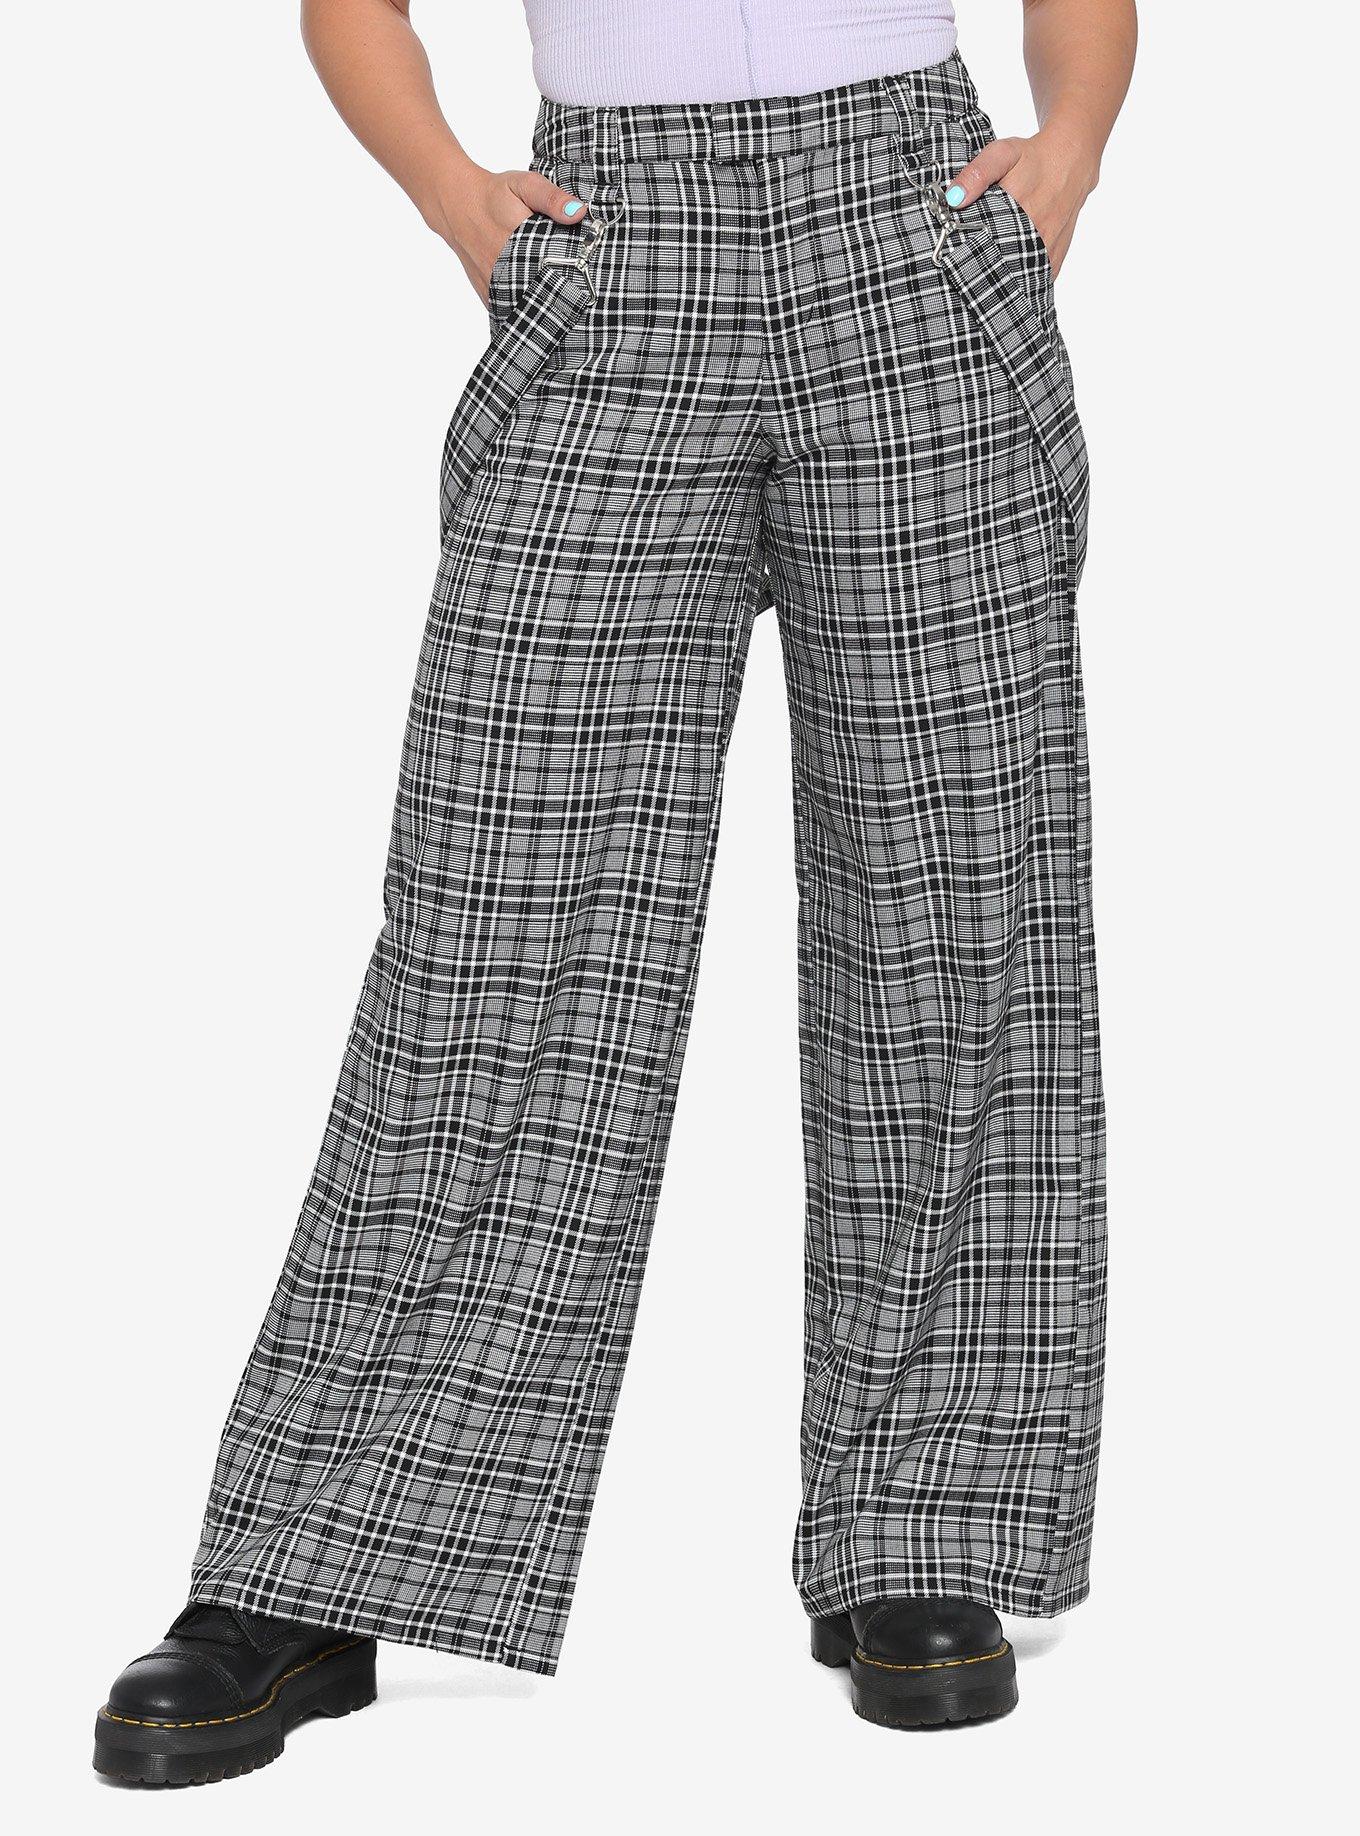 Hot Topic, Pants & Jumpsuits, Hot Topic Grey Plaid Pants With Chain